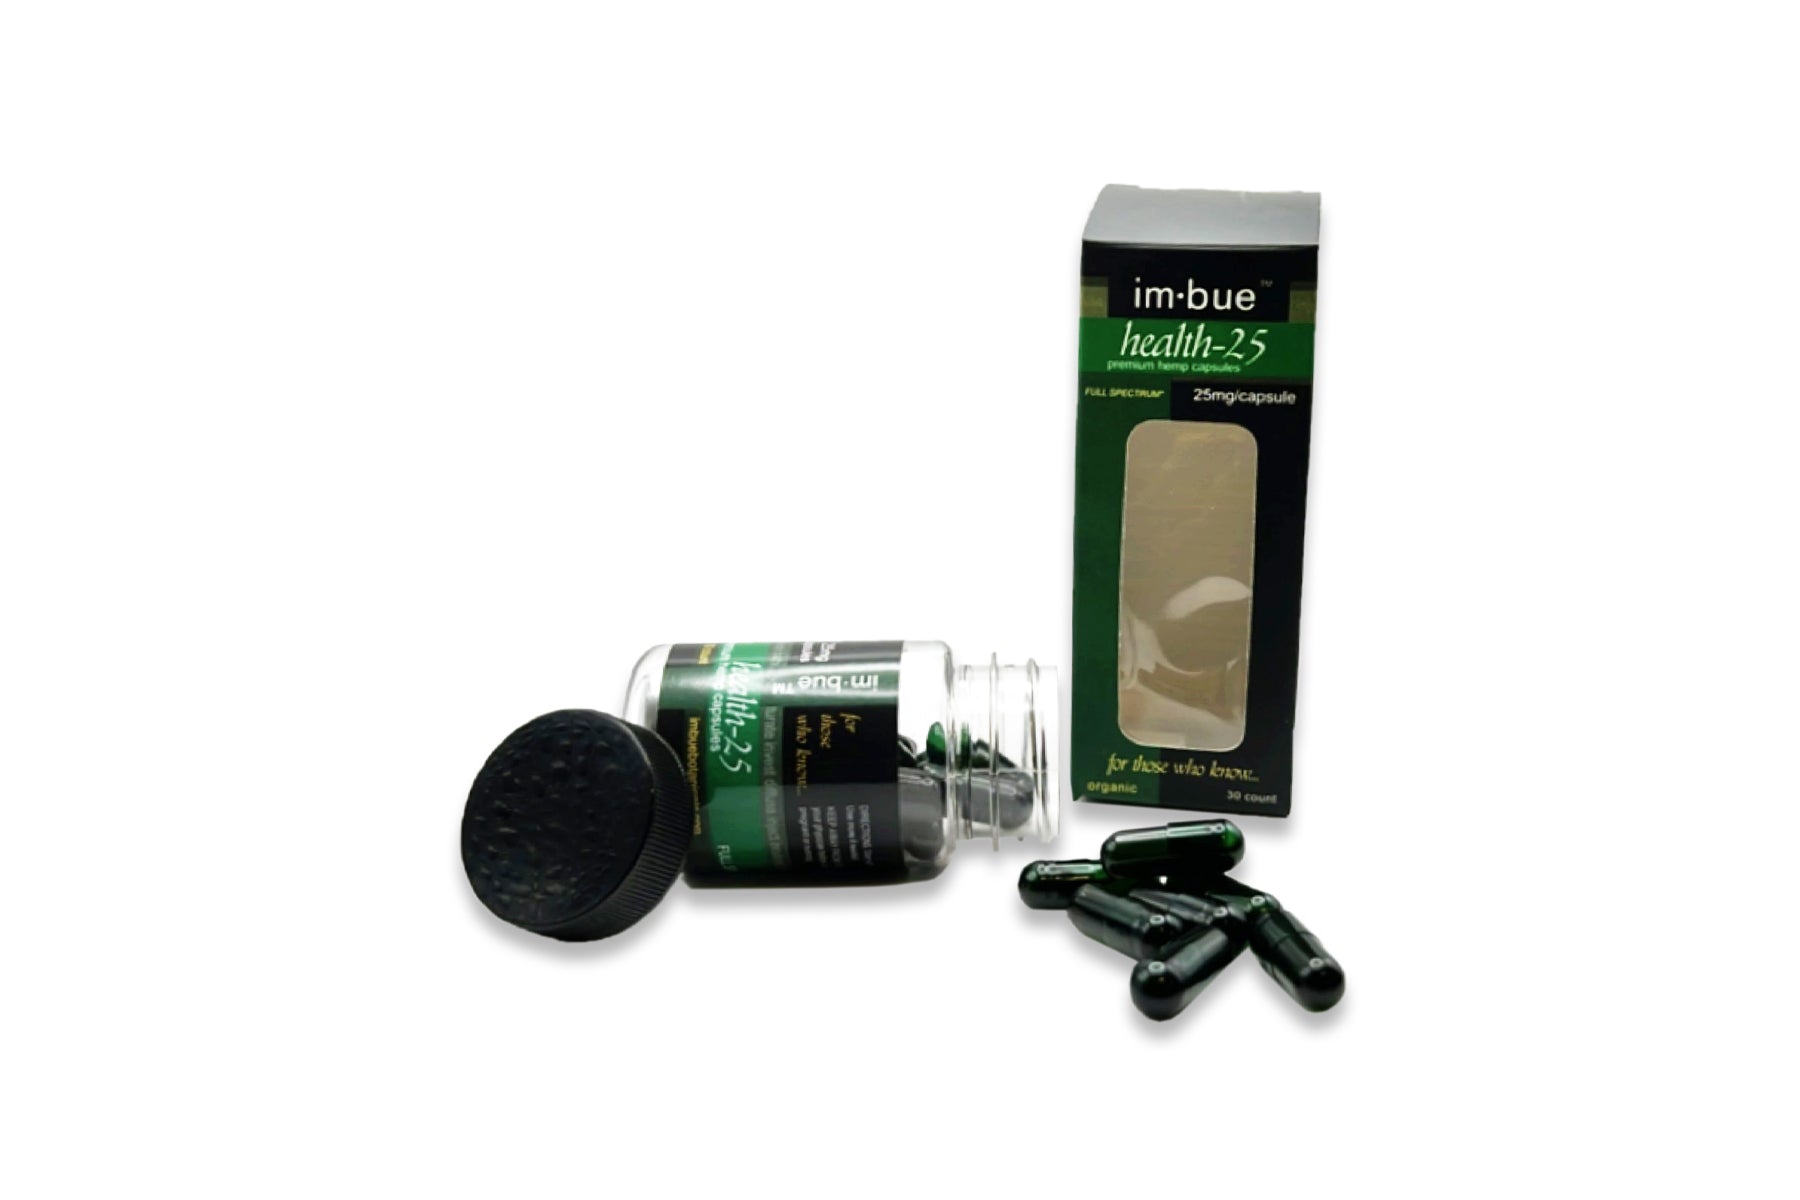 25mg CBD capsules box and bottle with capsules in view